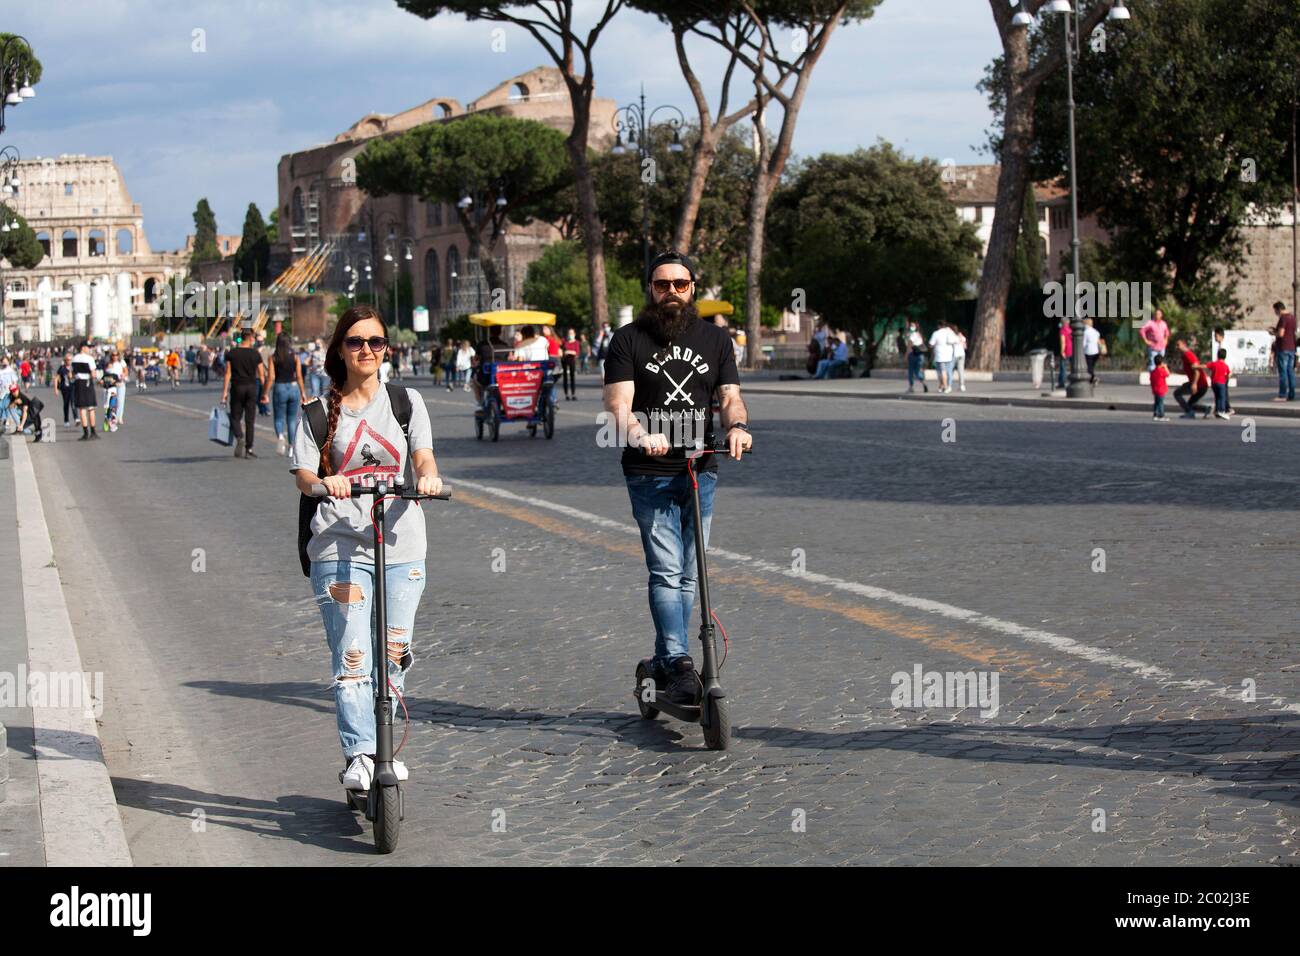 A couple of guys use electric scooters to commute in Via dei Fori Imperiali near Piazza Venezia in central Rome on June 02, 2020 as Italy starts to ease its lockdown, during the country's lockdown aimed at curbing the spread of the COVID-19 infection, caused by the novel coronavirus. Stock Photo